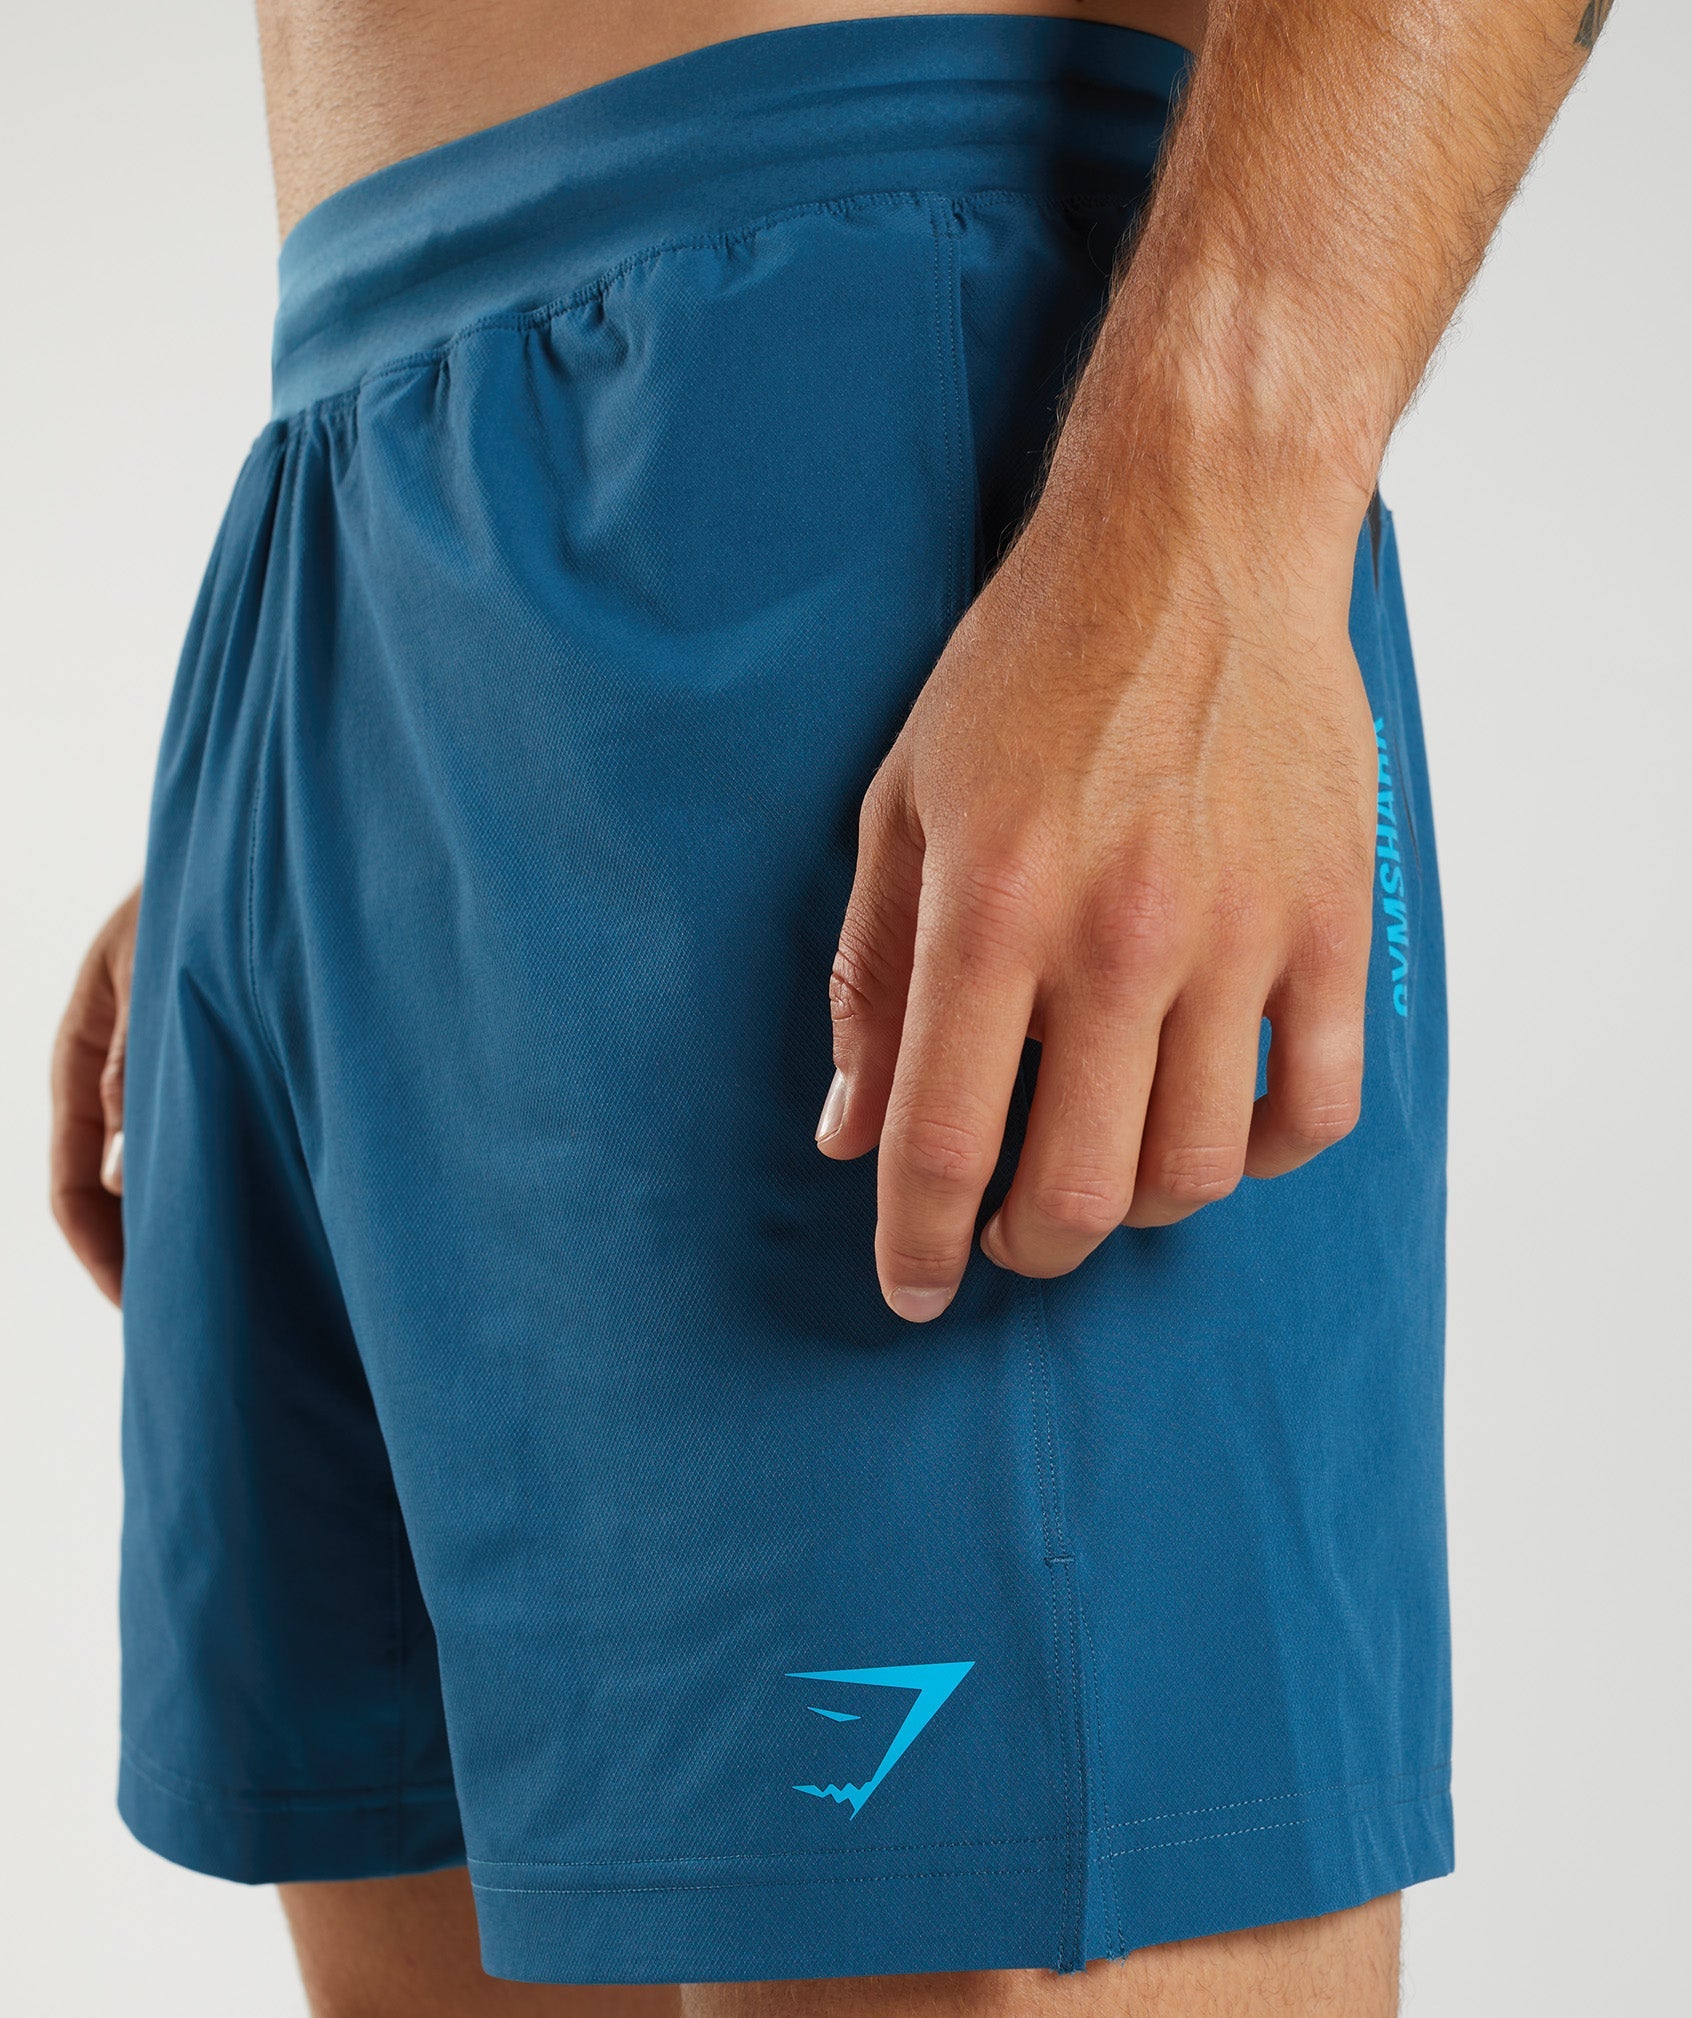 Apex 8" Function Shorts in Atlantic Blue - view 6